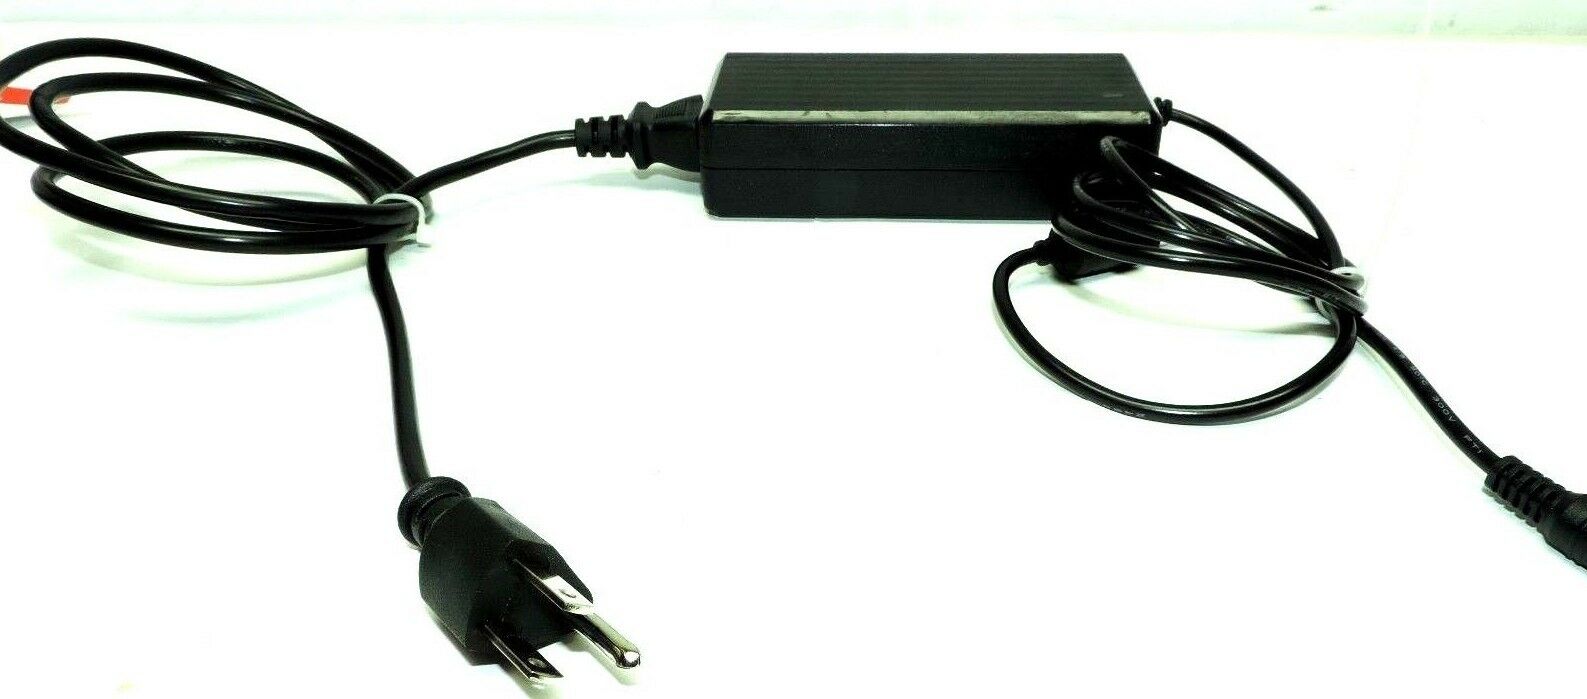 Battery Charger for Bestcare PL400H or Genesis 400 Electric Patient Lift Type: C